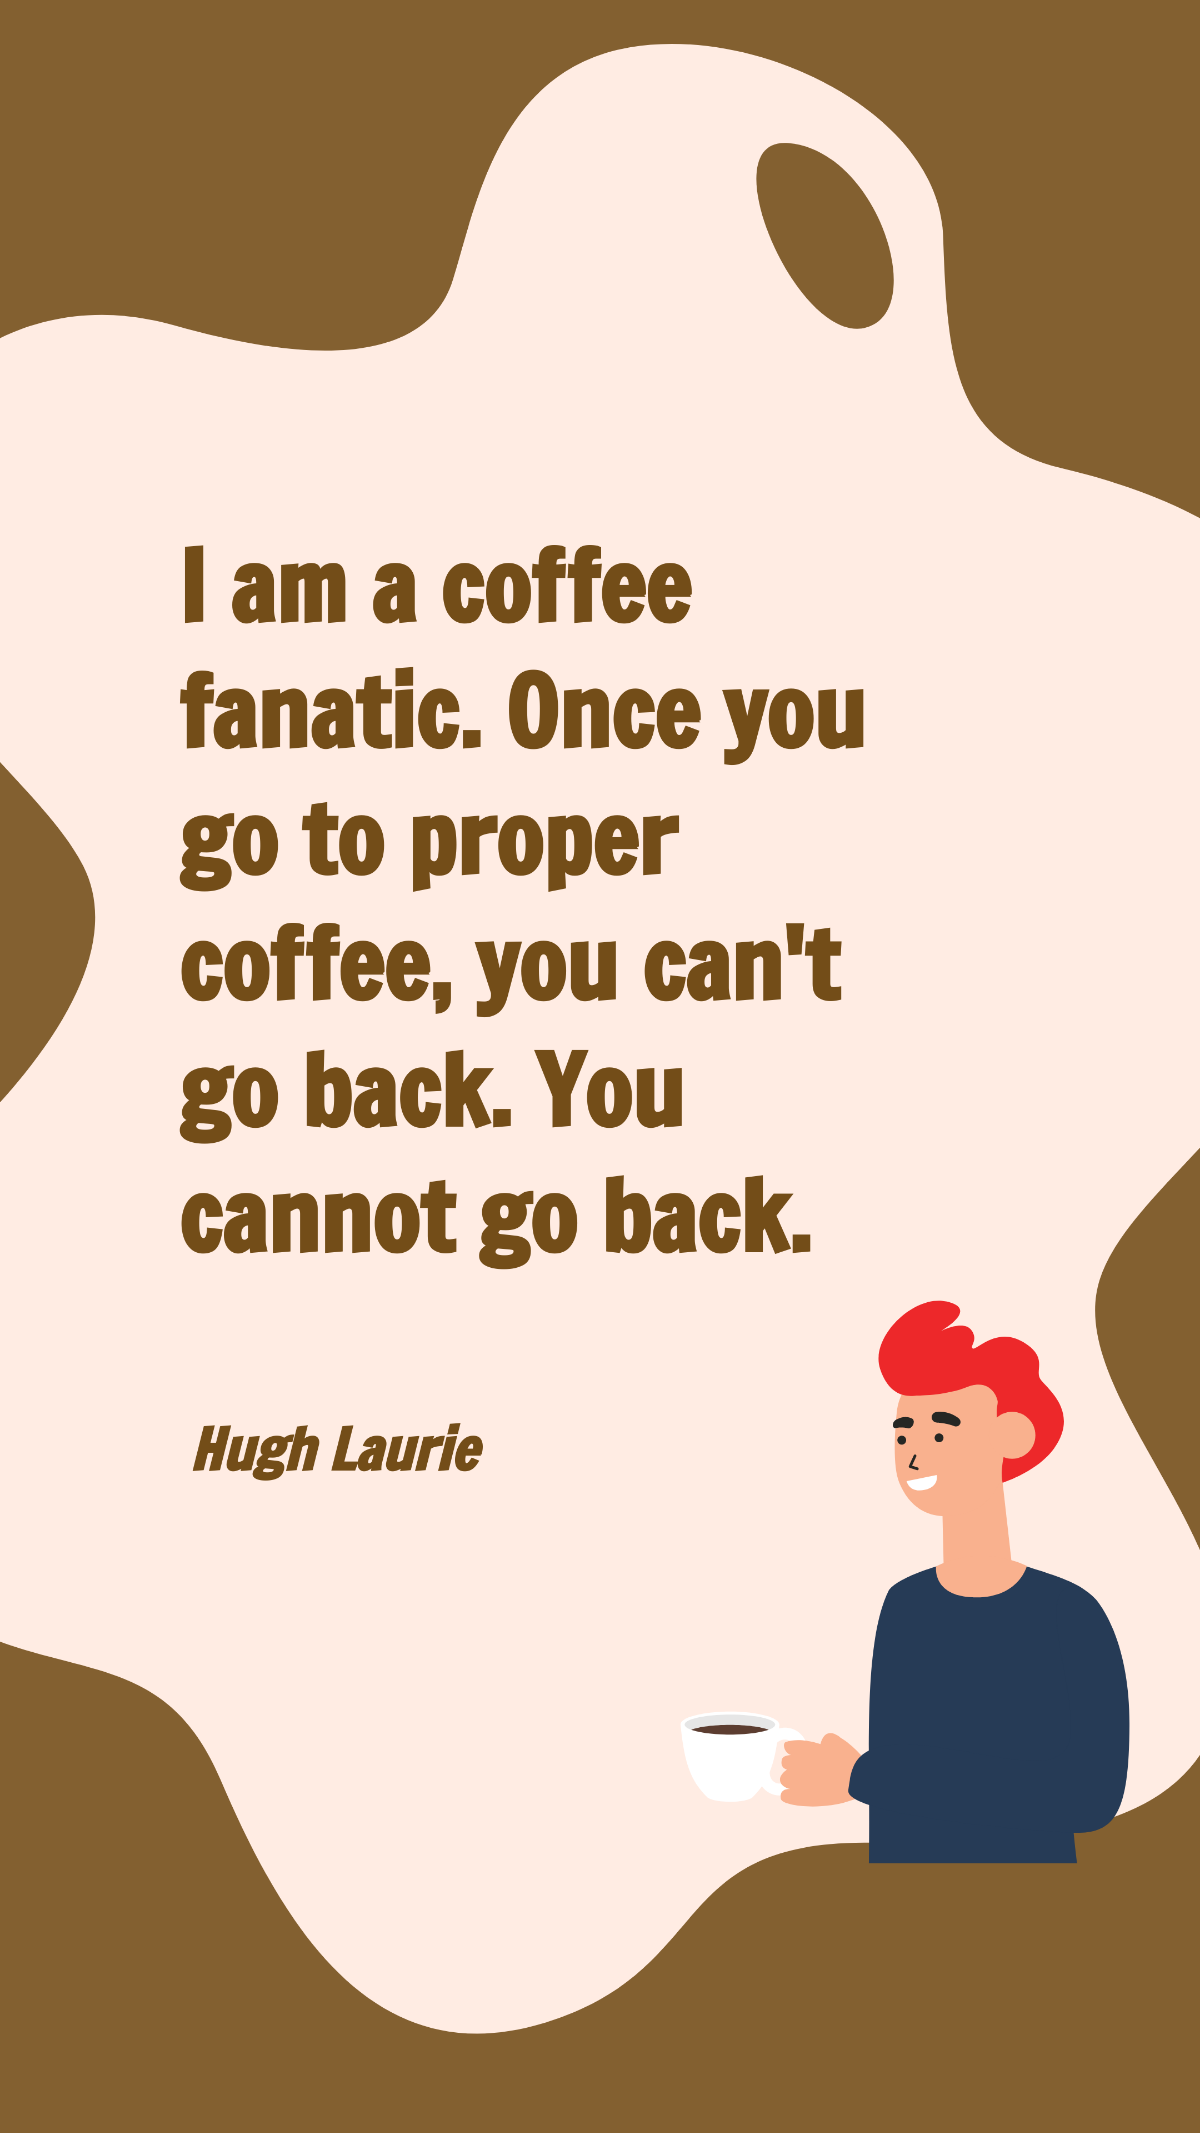 Hugh Laurie - I am a coffee fanatic. Once you go to proper coffee, you can't go back. You cannot go back. Template